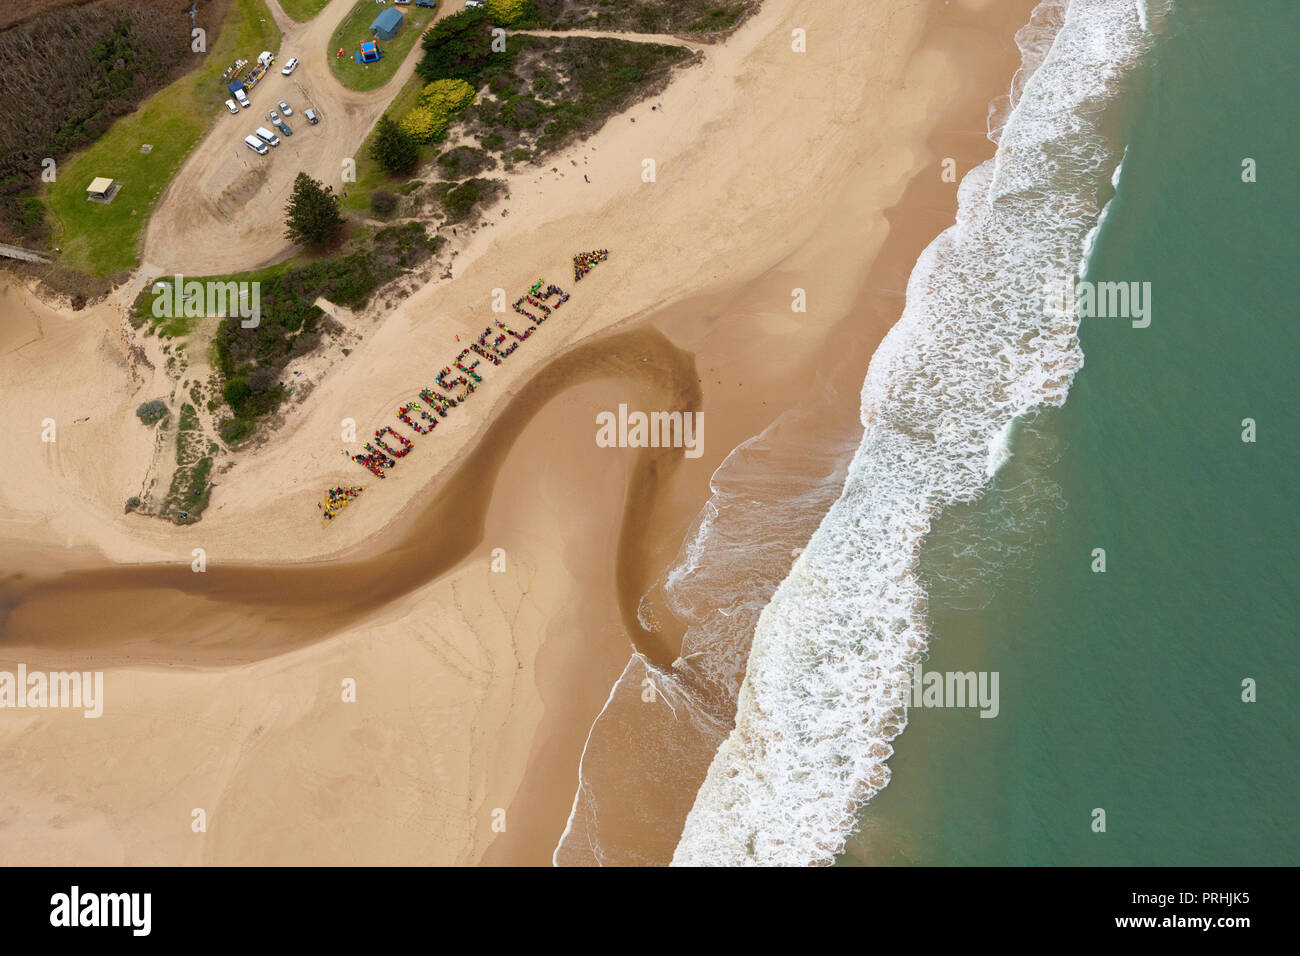 Locals protest proposed coal seam gas developments via a 'No Gasfields' human sign on the beach at Seaspray in Gippsland, Australia. Stock Photo